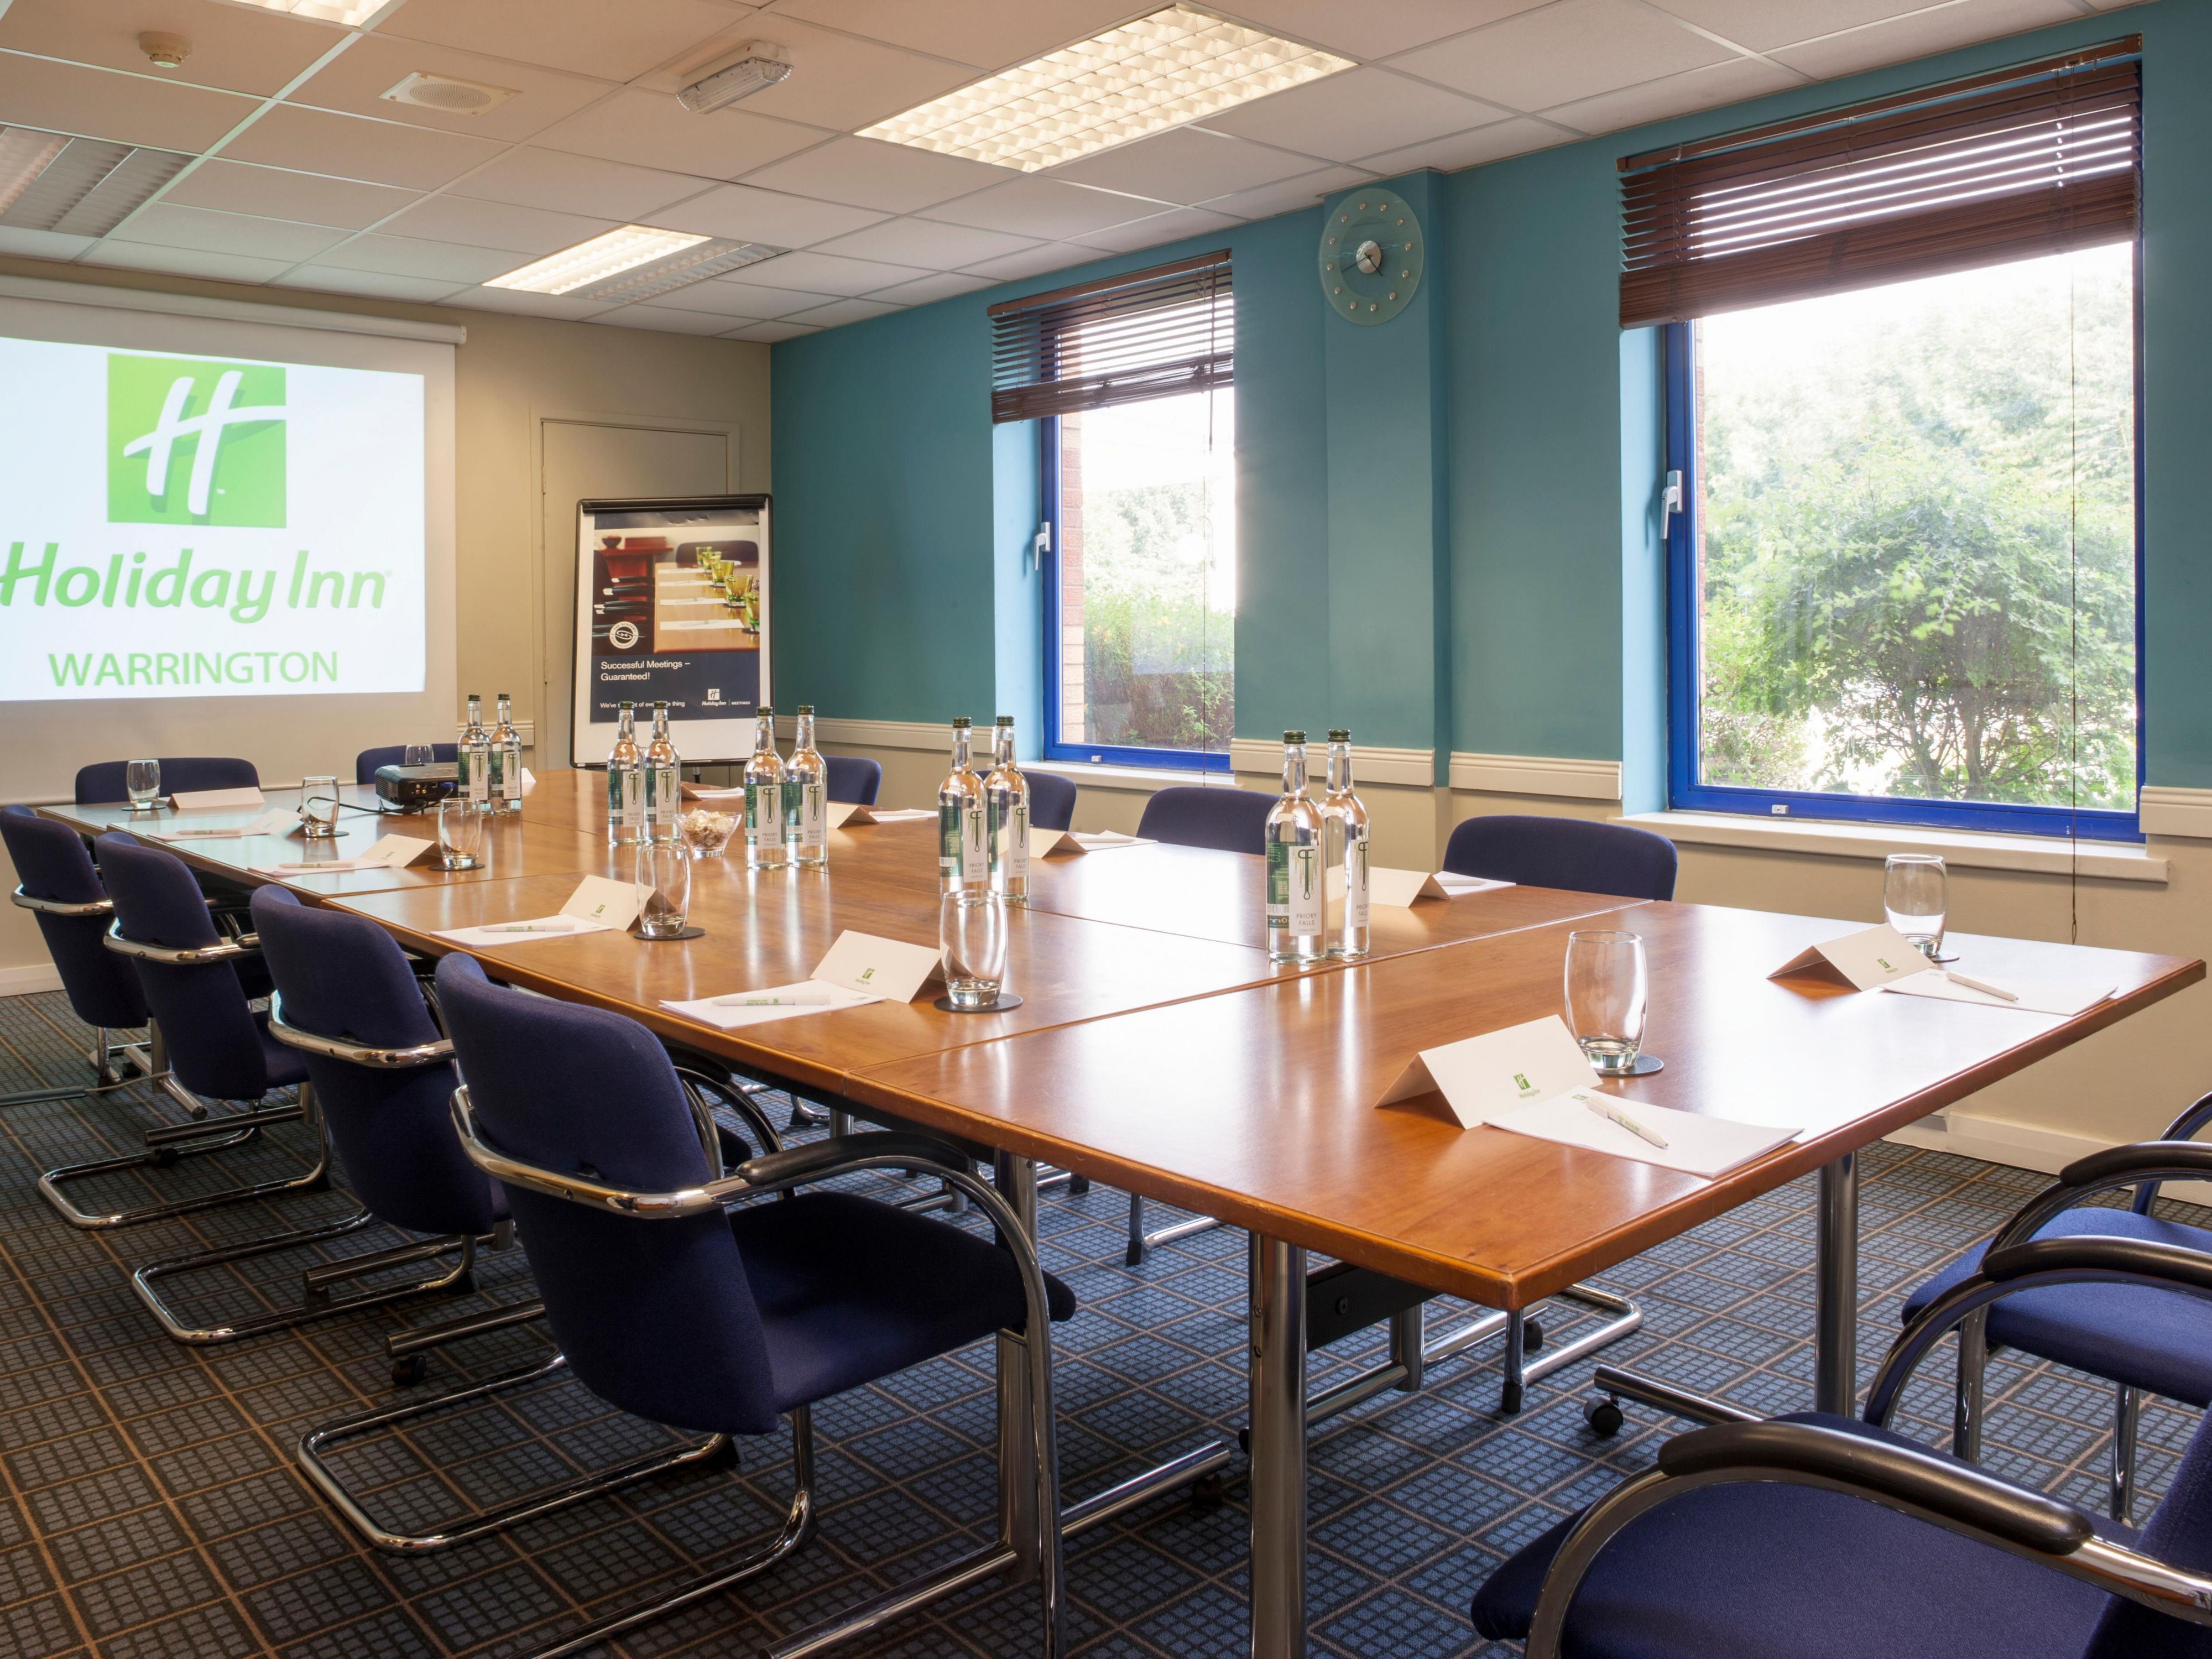 Looking for the perfect venue to host your next meeting? With us you can build your ideal package and our experienced staff will ensure your meeting runs smoothly.